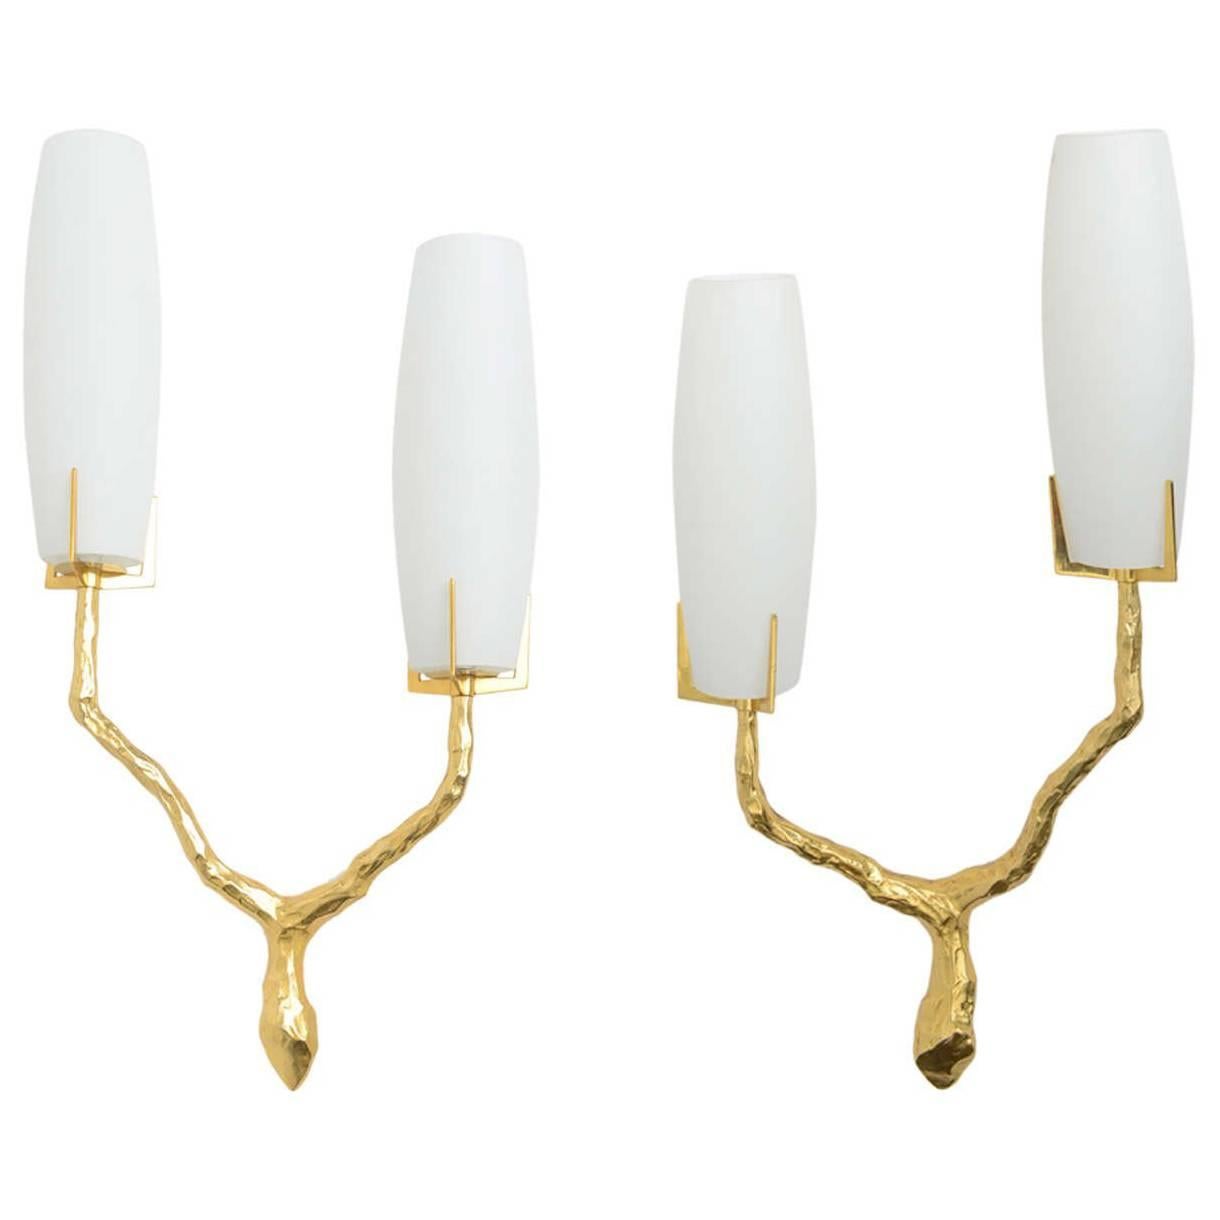 Pair of French modern gilt bronze and glass wall lights by Maison Arlus, 1960's. All in gilt bronze in branch form, with frosted glass.